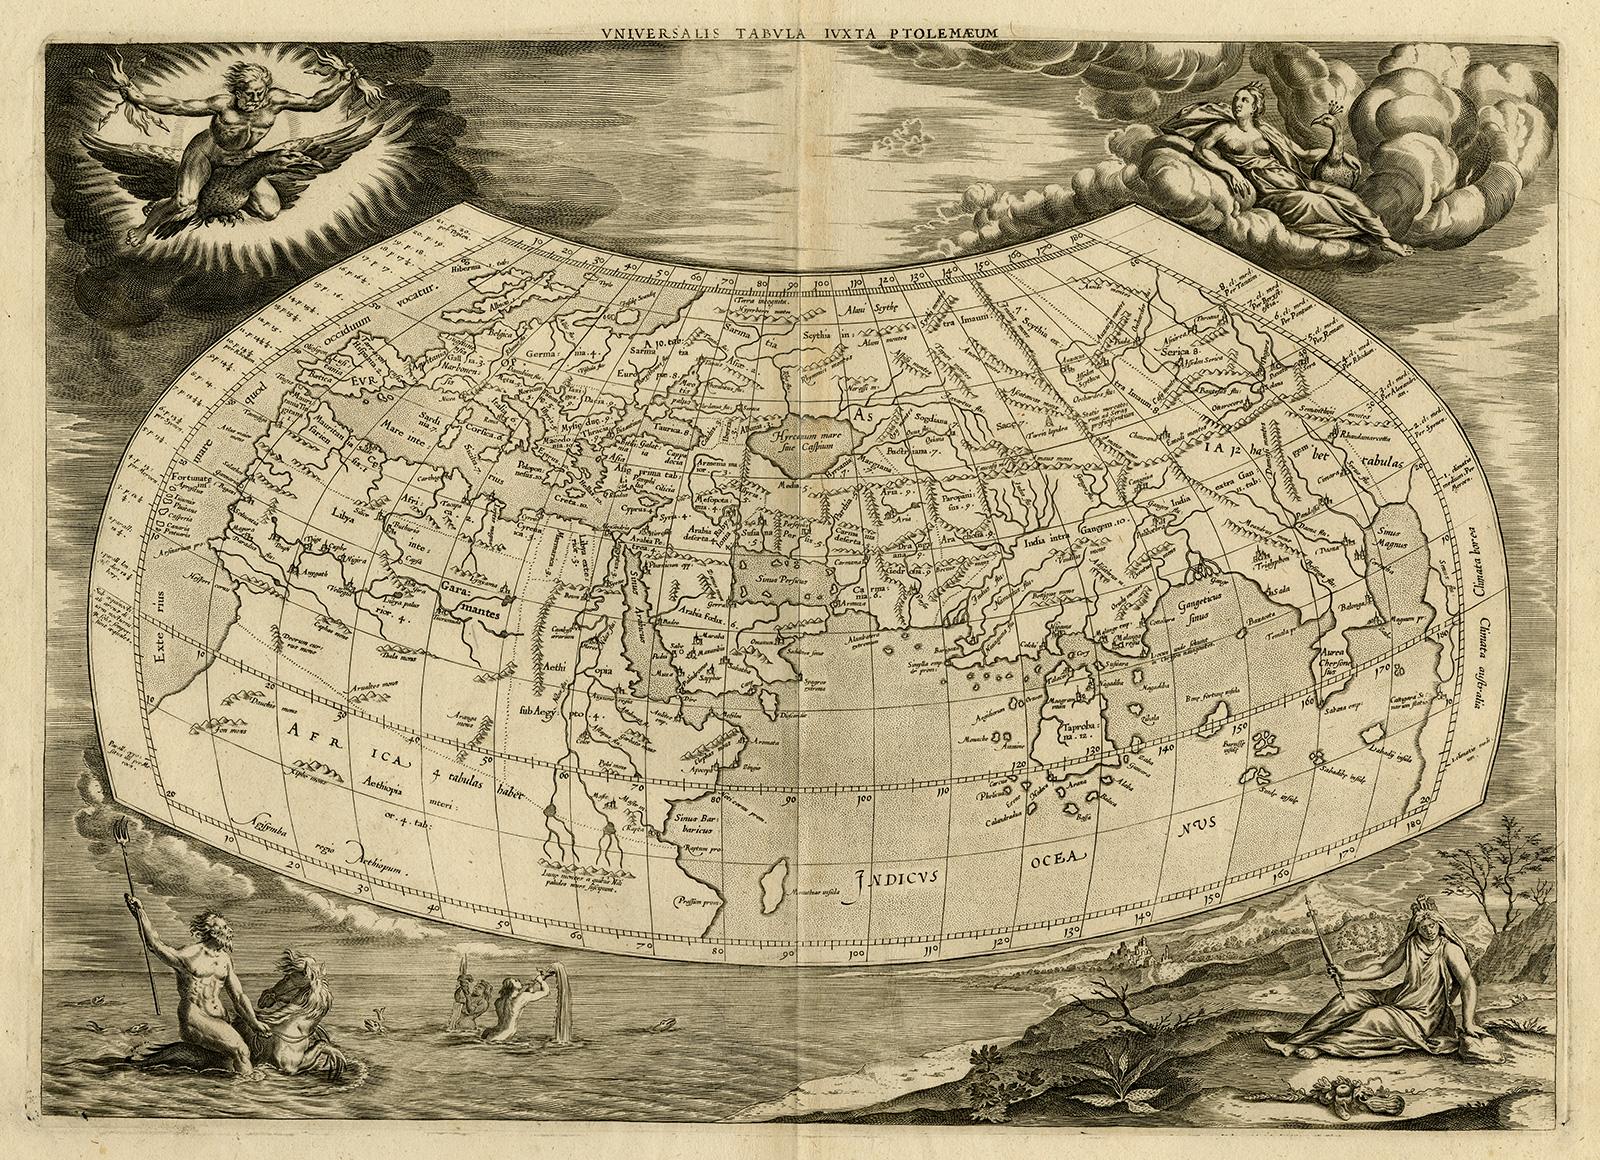 Gerard Mercator Print - Very decorative world map of the ancient world by Mercator - Engraving - 17th c.